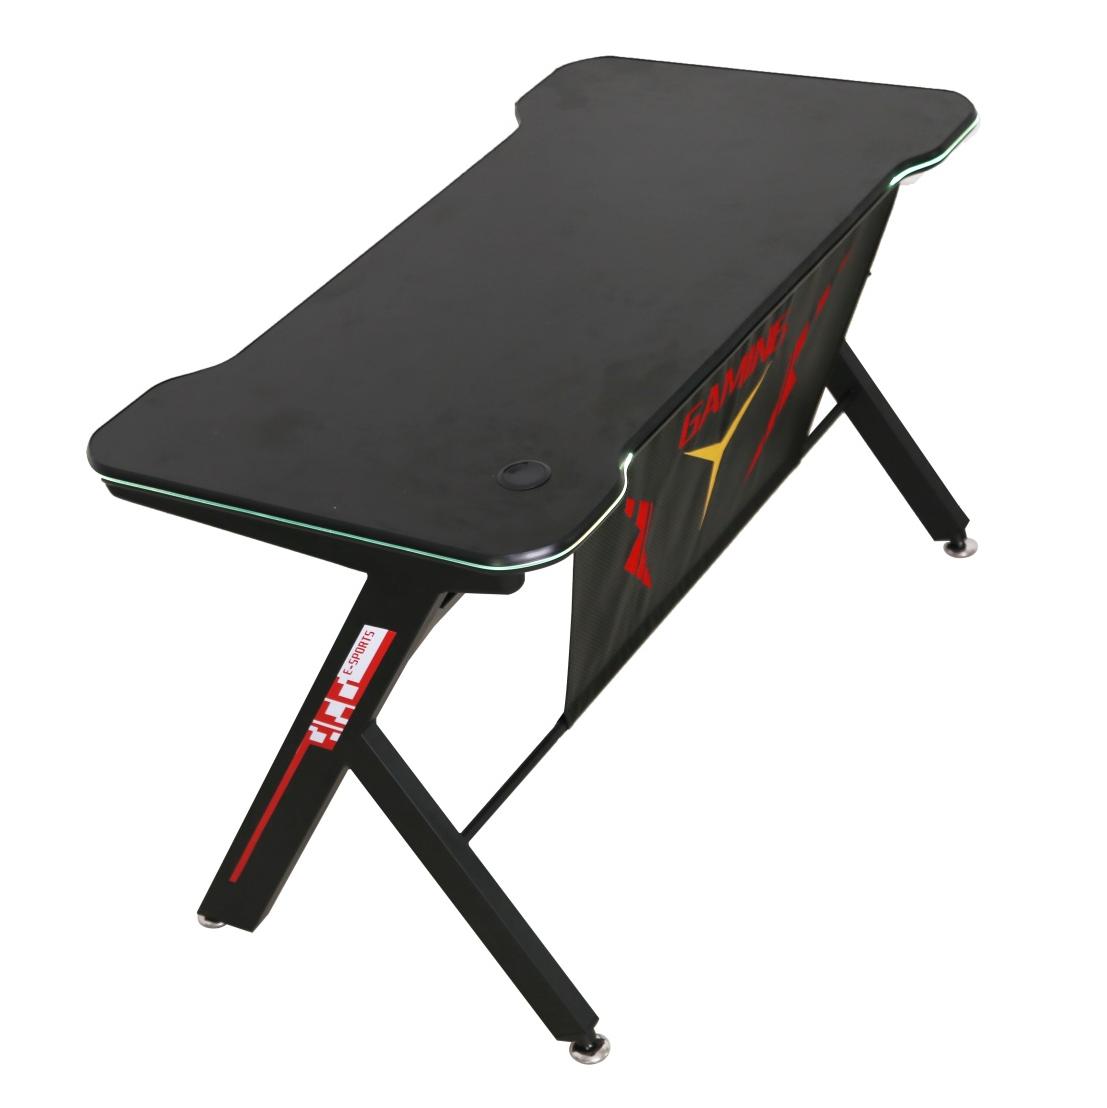 ViscoLogic Gaming Desk Computer Table R - Shape Sports Racing Table with LED Lights